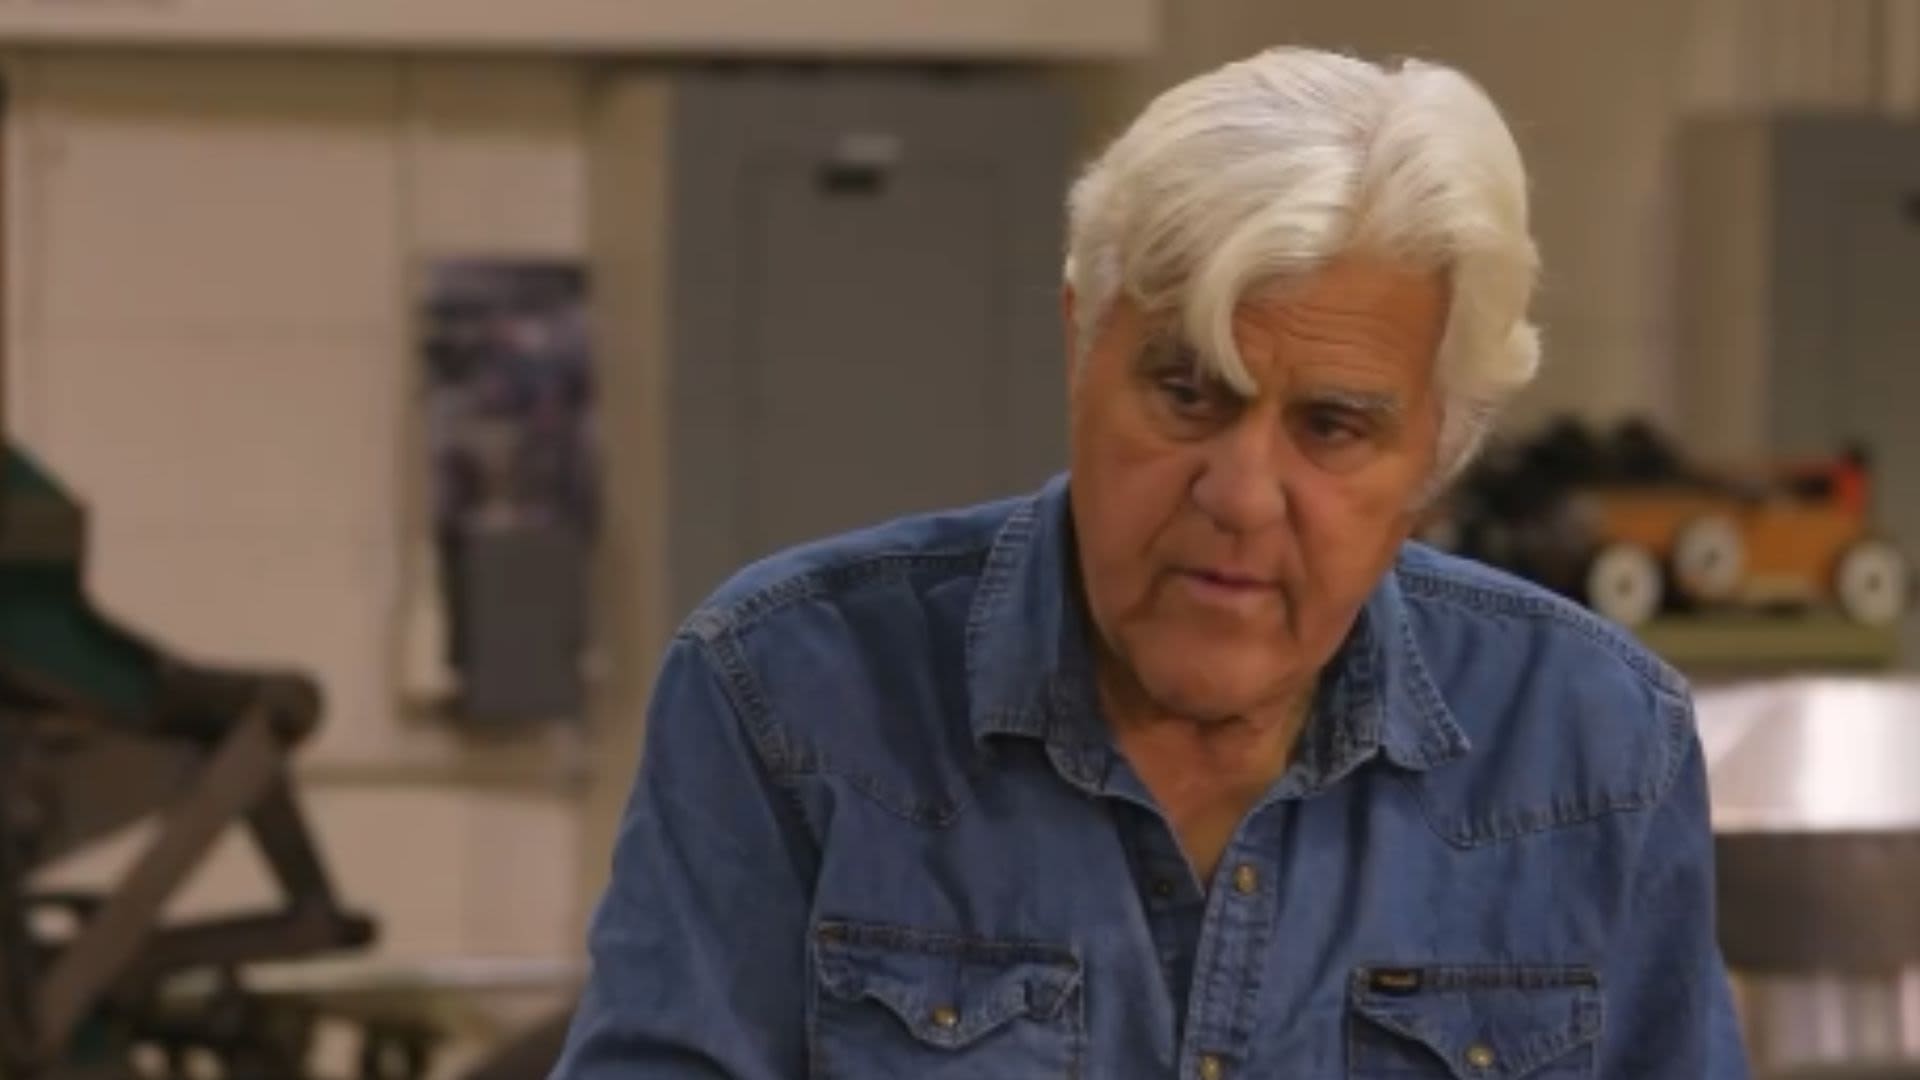 Jay Leno Goes Off On Los Angeles Theft Trend